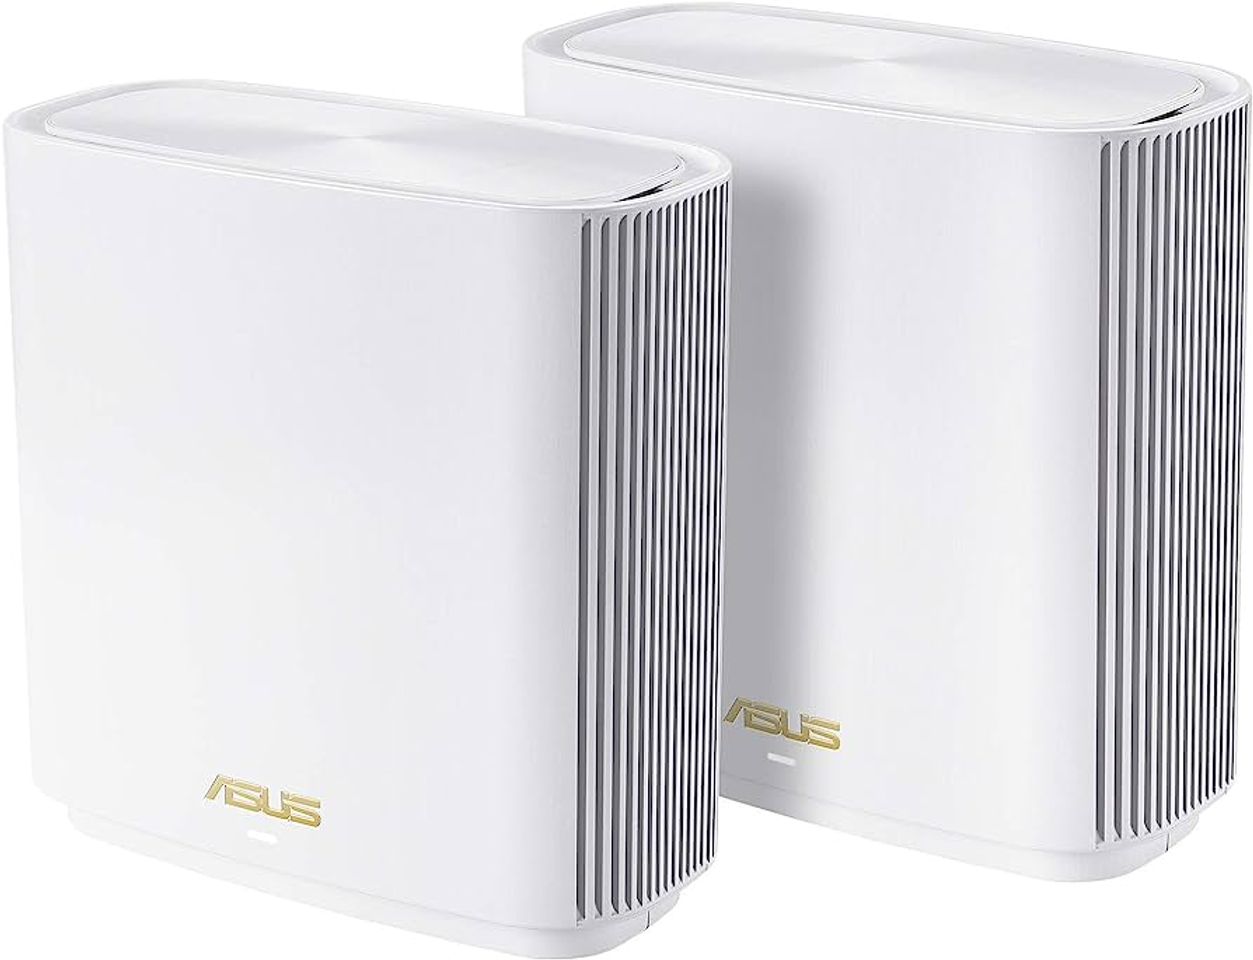 Asus ZenWiFi AX Whole-Home Tri-Band Mesh WiFi 6 System Review